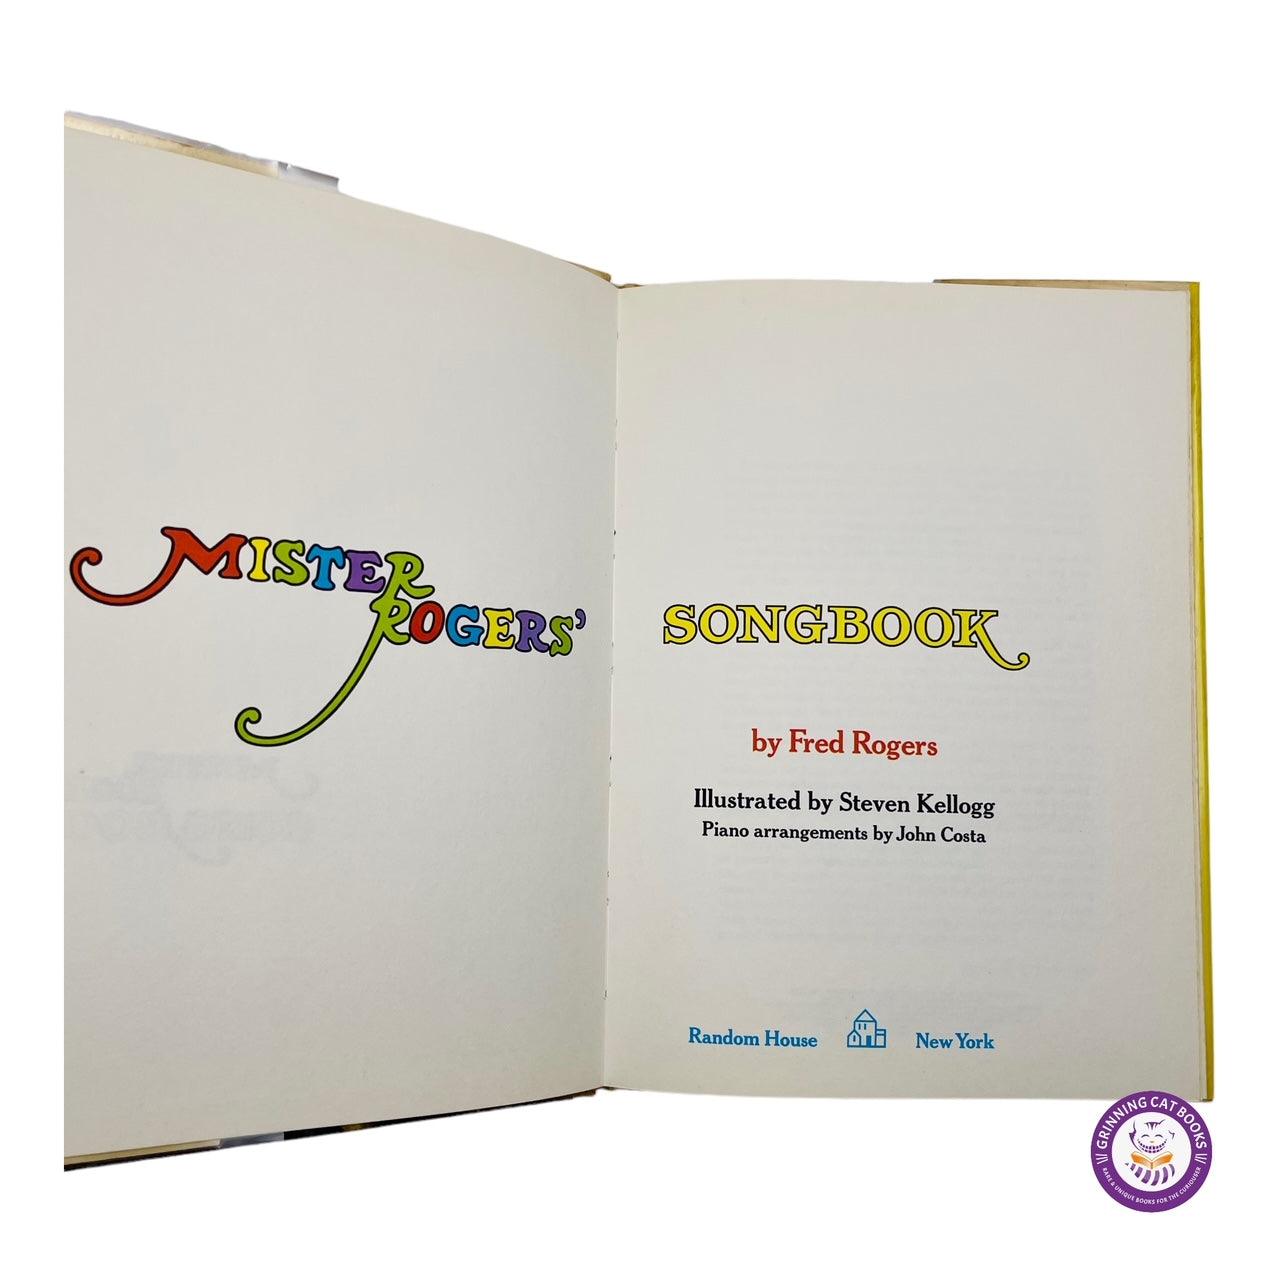 Mr. Rogers' Songbook (First Edition with illustrations by Steven Kellogg) - Grinning Cat Books - books - ILLUSTRATED BOOKS